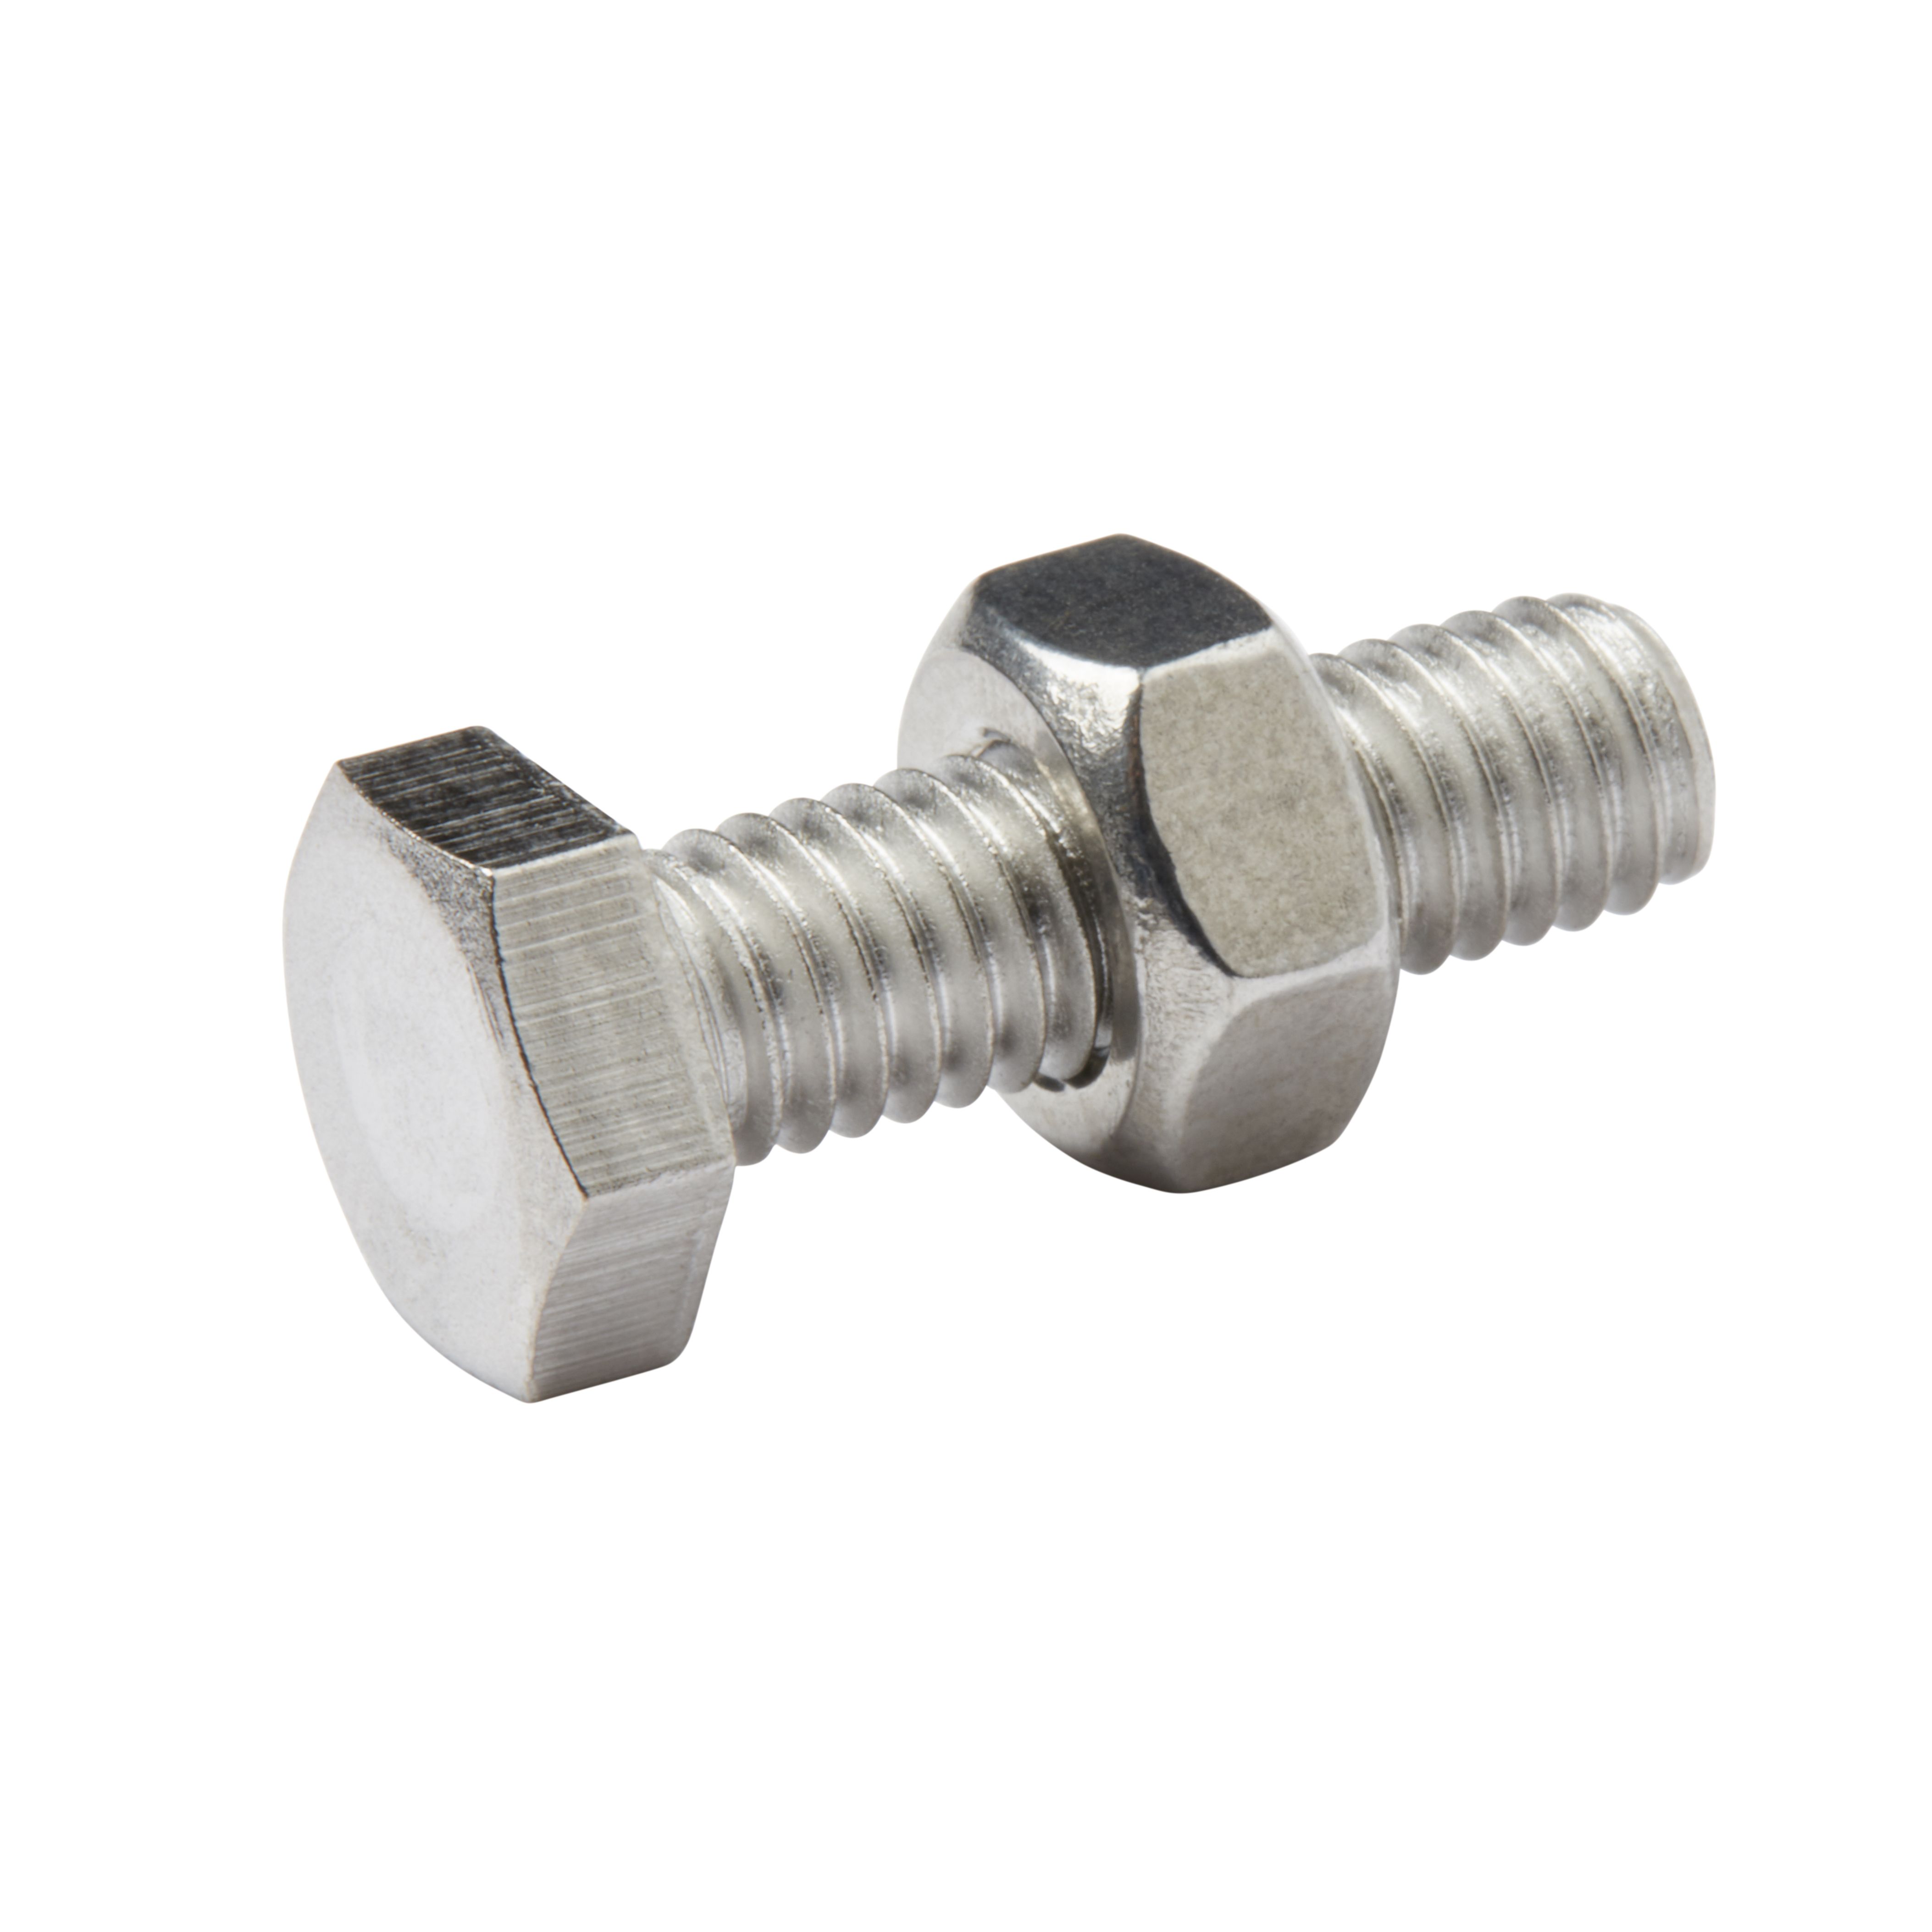 Diall M6 Hex Stainless steel Bolt & nut (L)20mm (Dia)6mm, Pack of 10